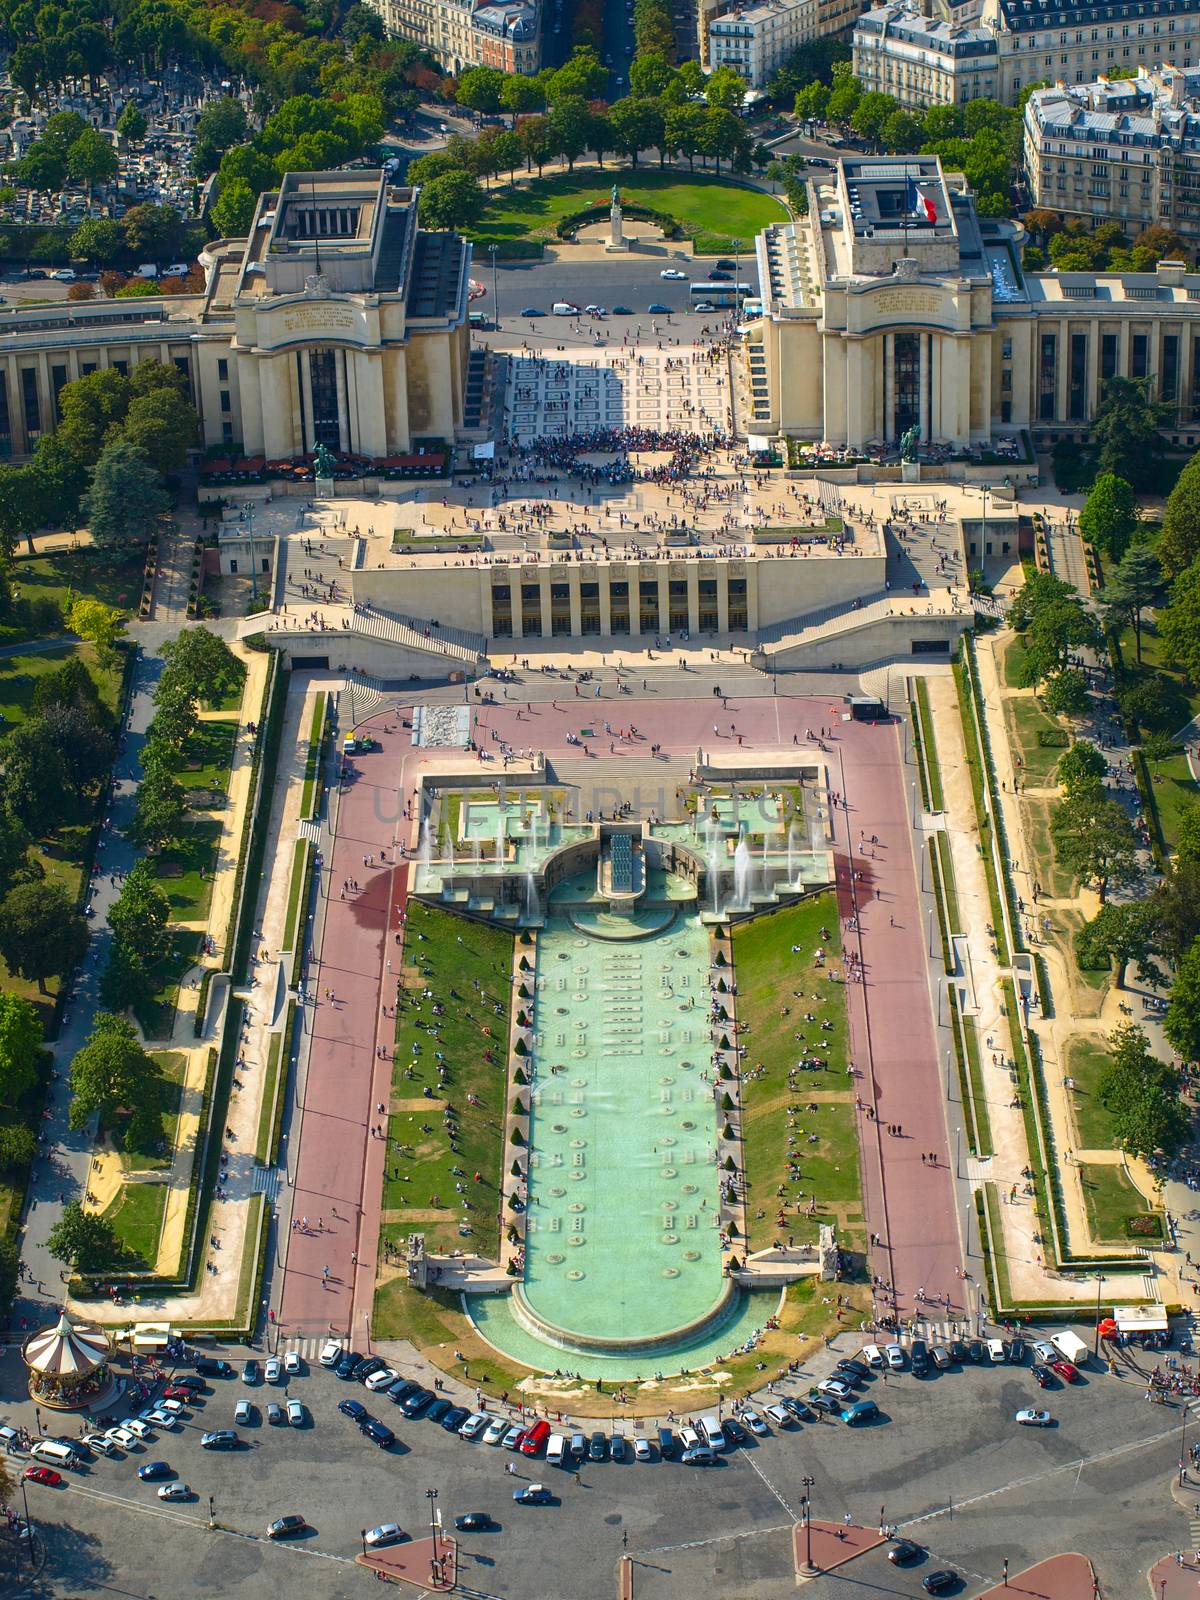 View of Trocadero from Eiffel Tower (Paris, France)